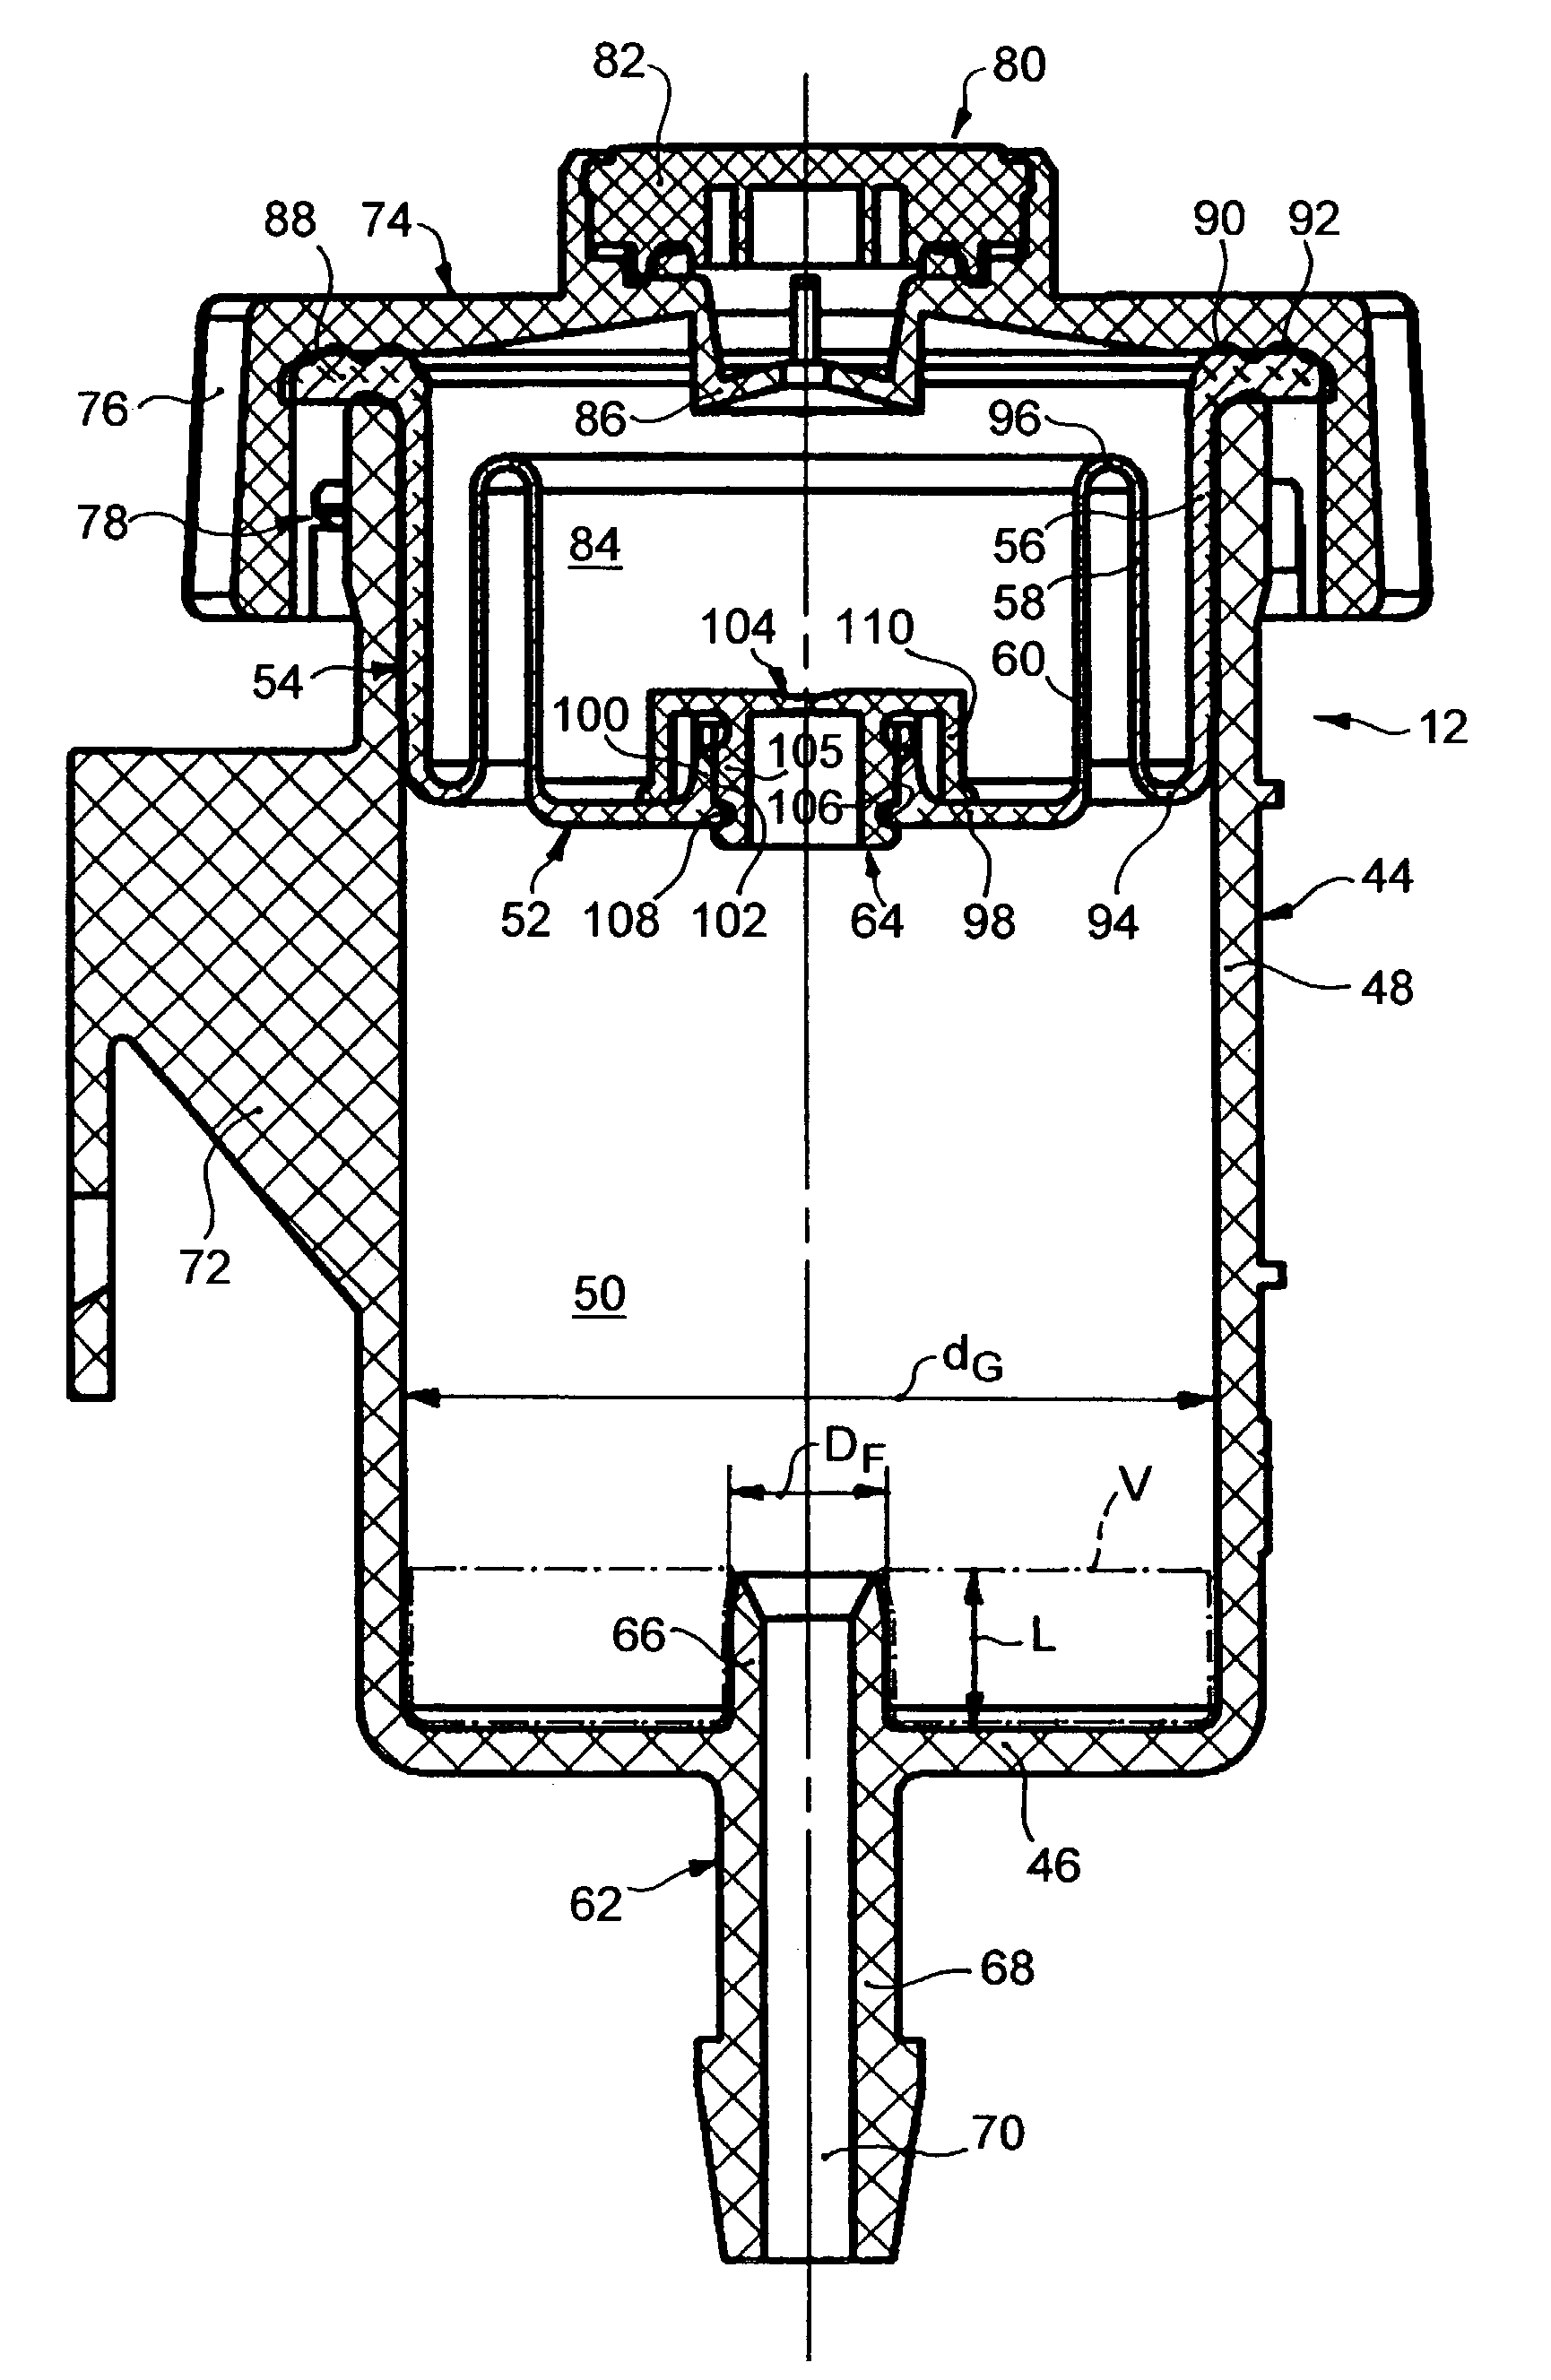 Expansion reservoir for a master cylinder of a hydraulic force transmission system